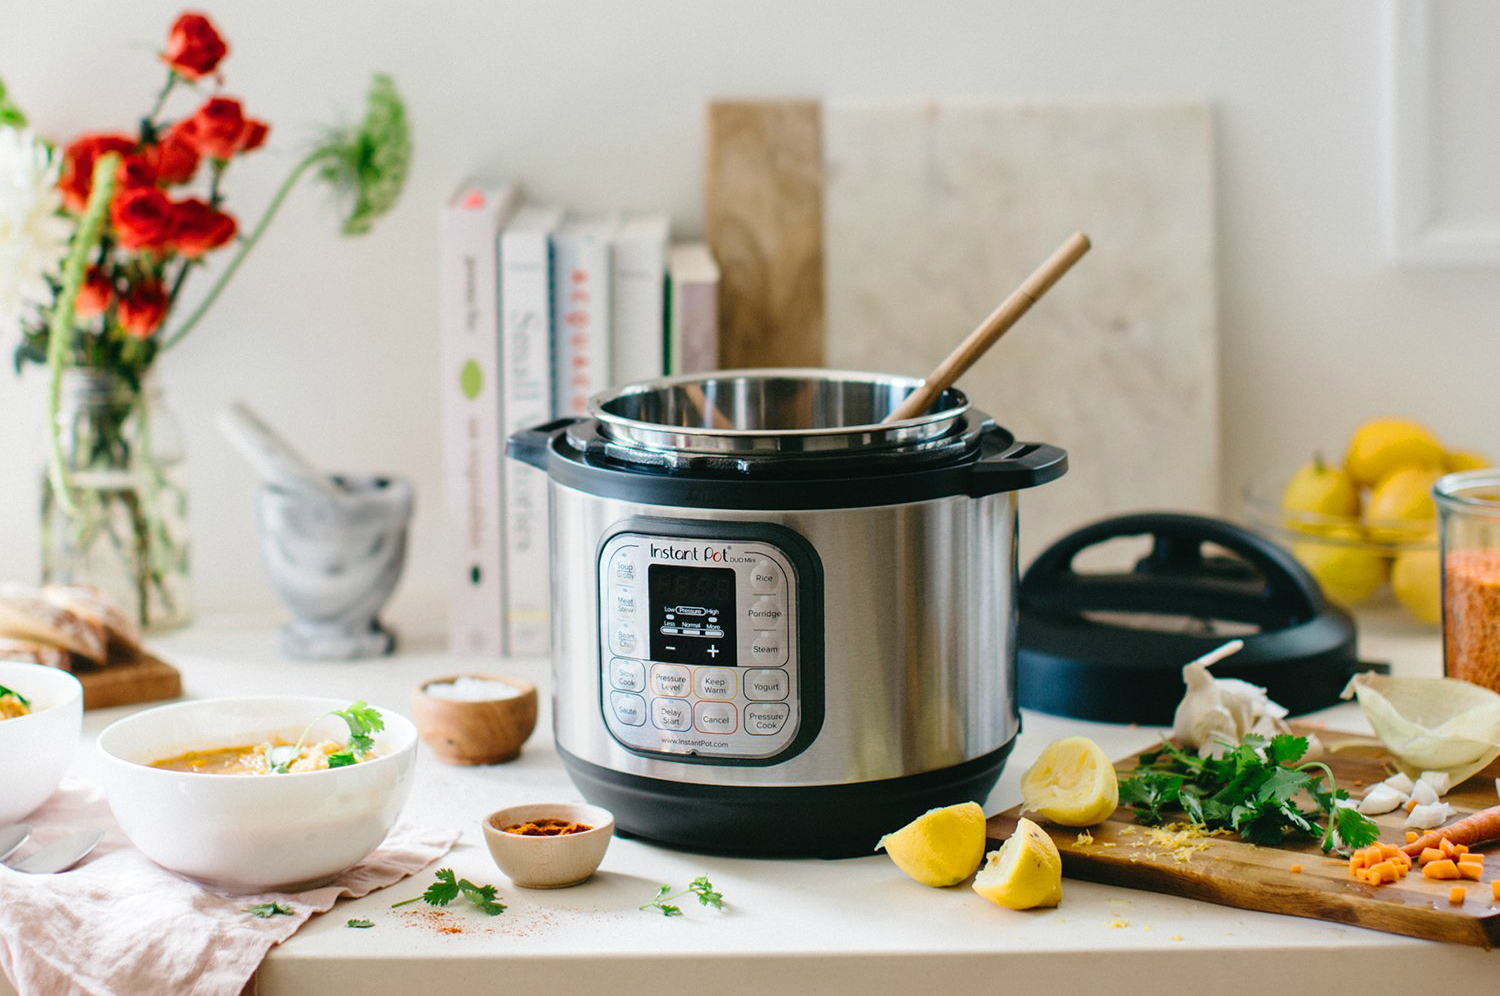 Shrinks the Price for the Instant Pot Duo Mini to Less Than